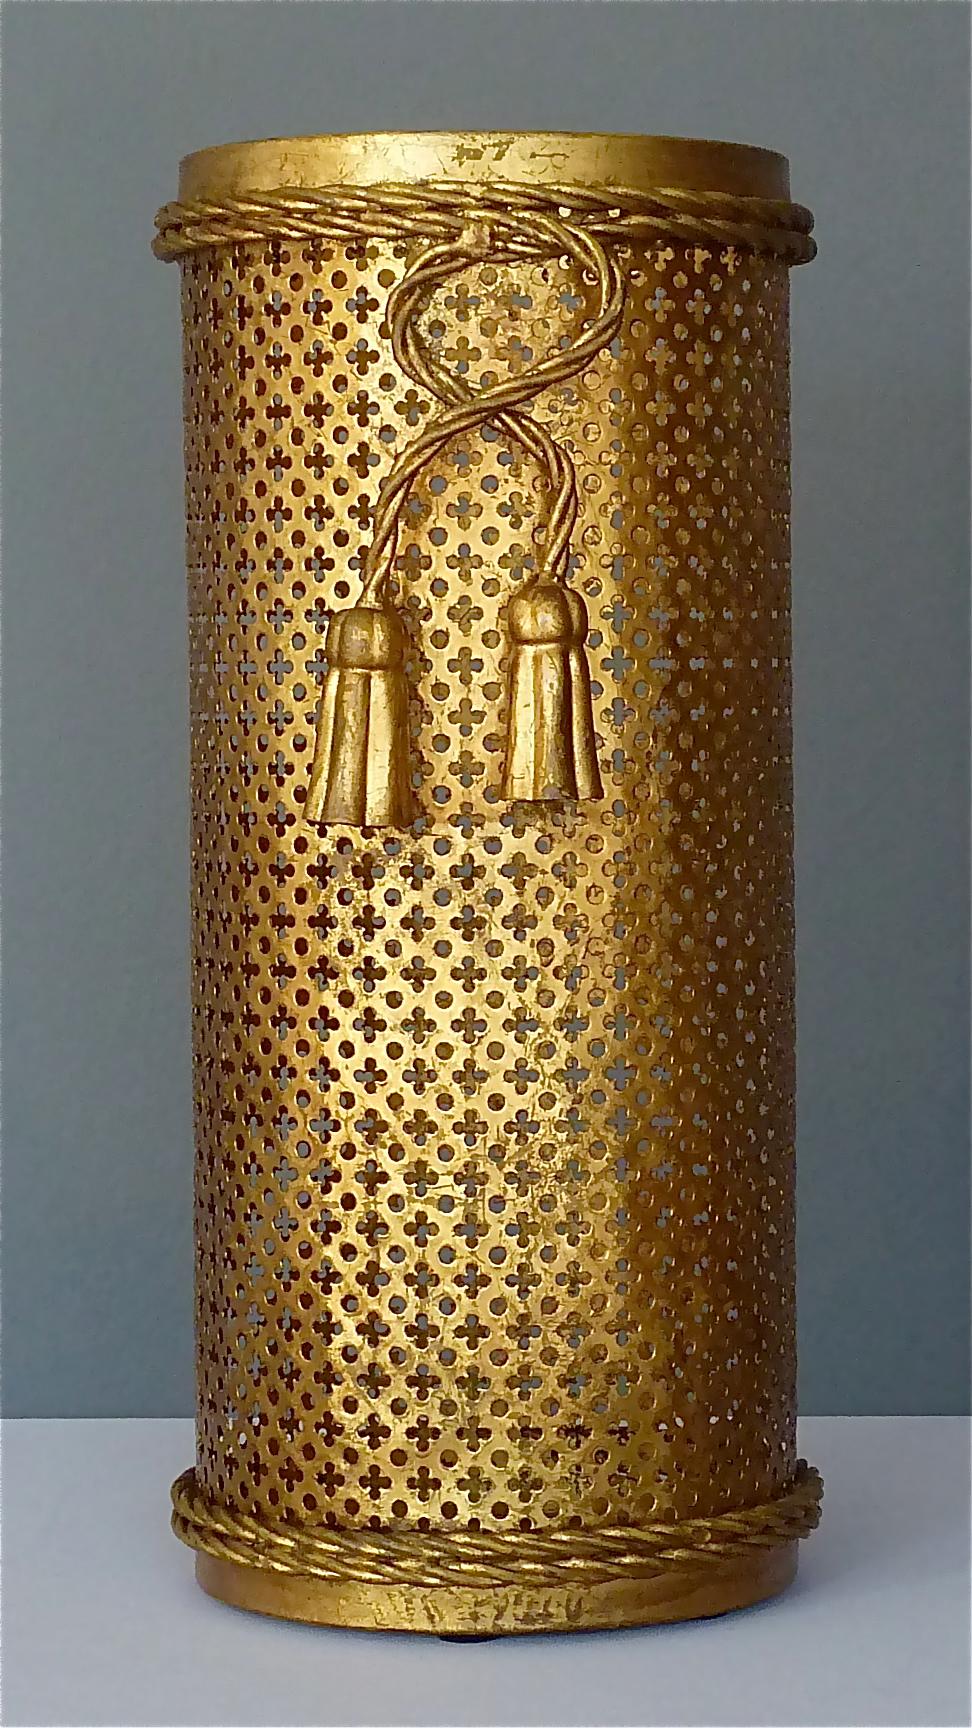 Italian Midcentury Umbrella Stand Gilt Perforated Metal, Hans Kögl Style, 1950s For Sale 7